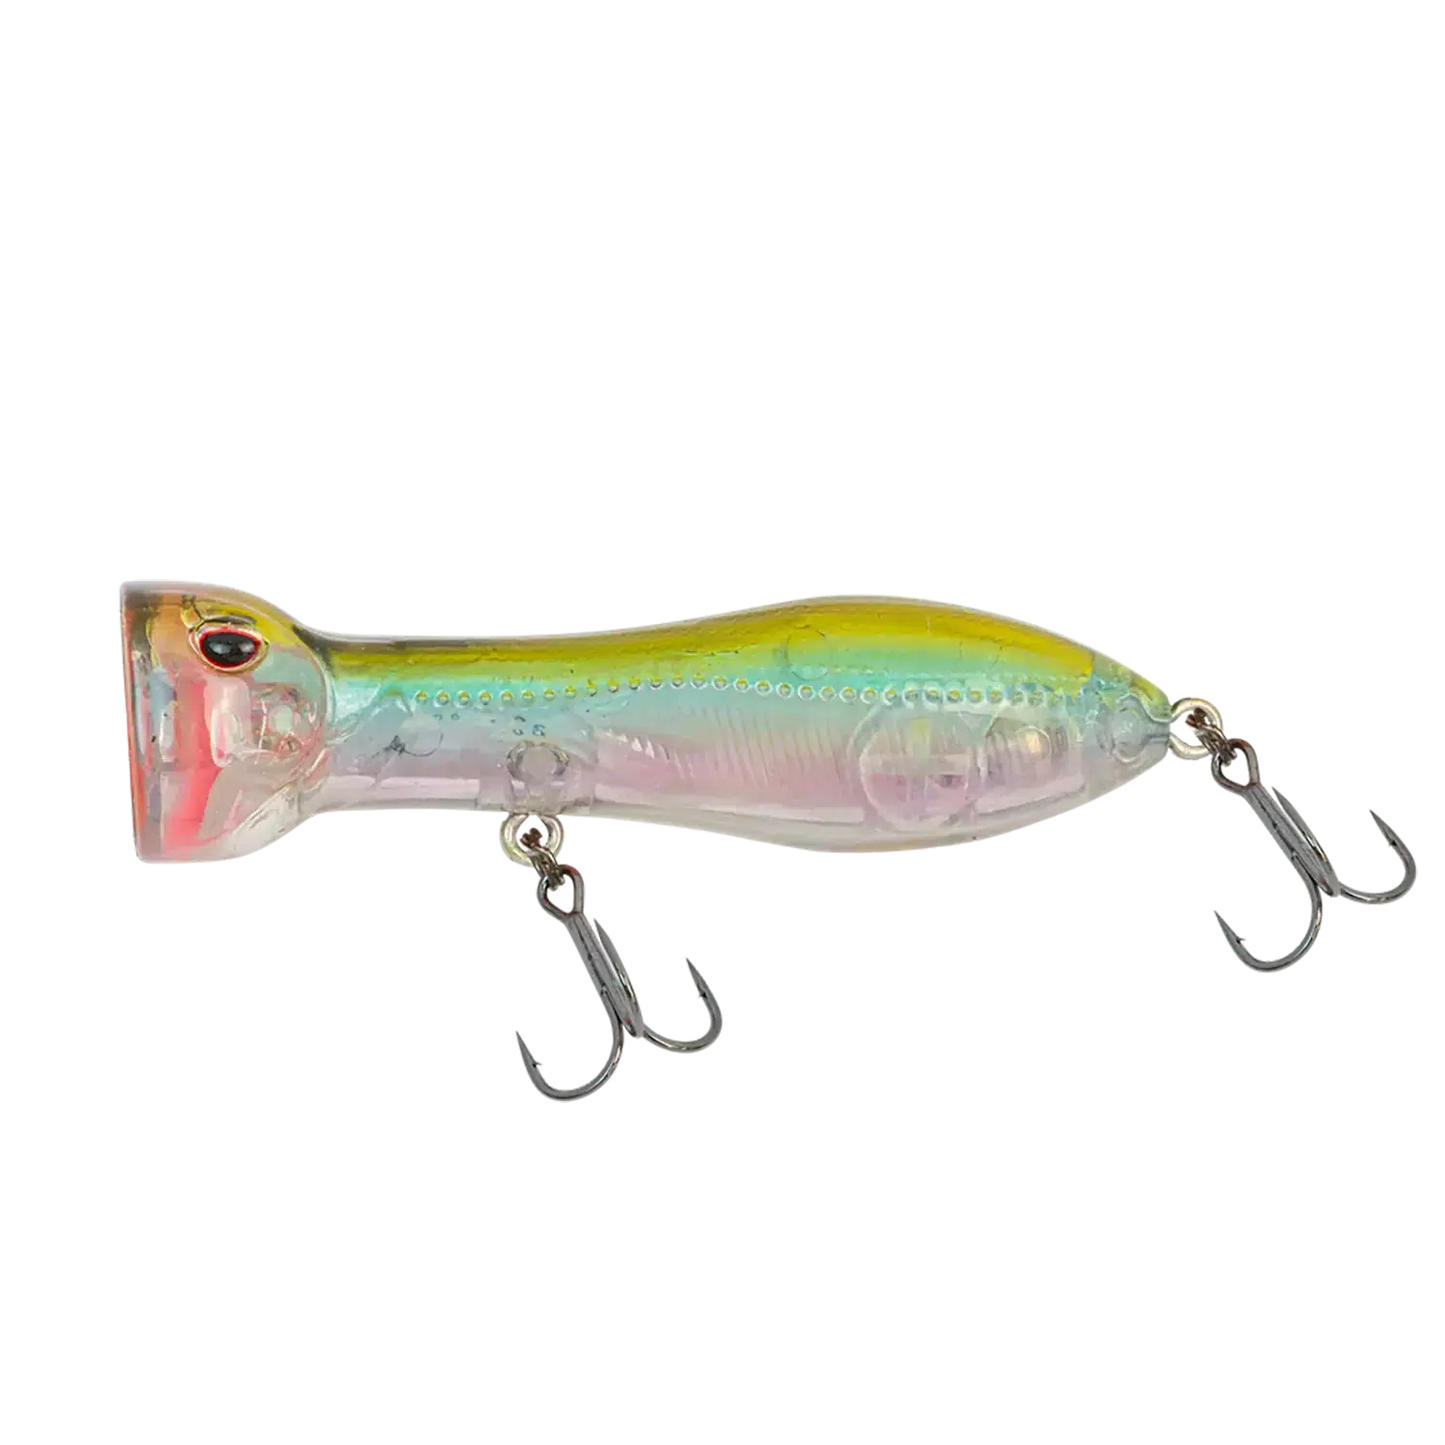 Nomad Chug Norris Auto Tune Light Tackle 72 FR-Lure - Poppers, Stickbaits & Pencils-Nomad-Aqua Ghost-Fishing Station